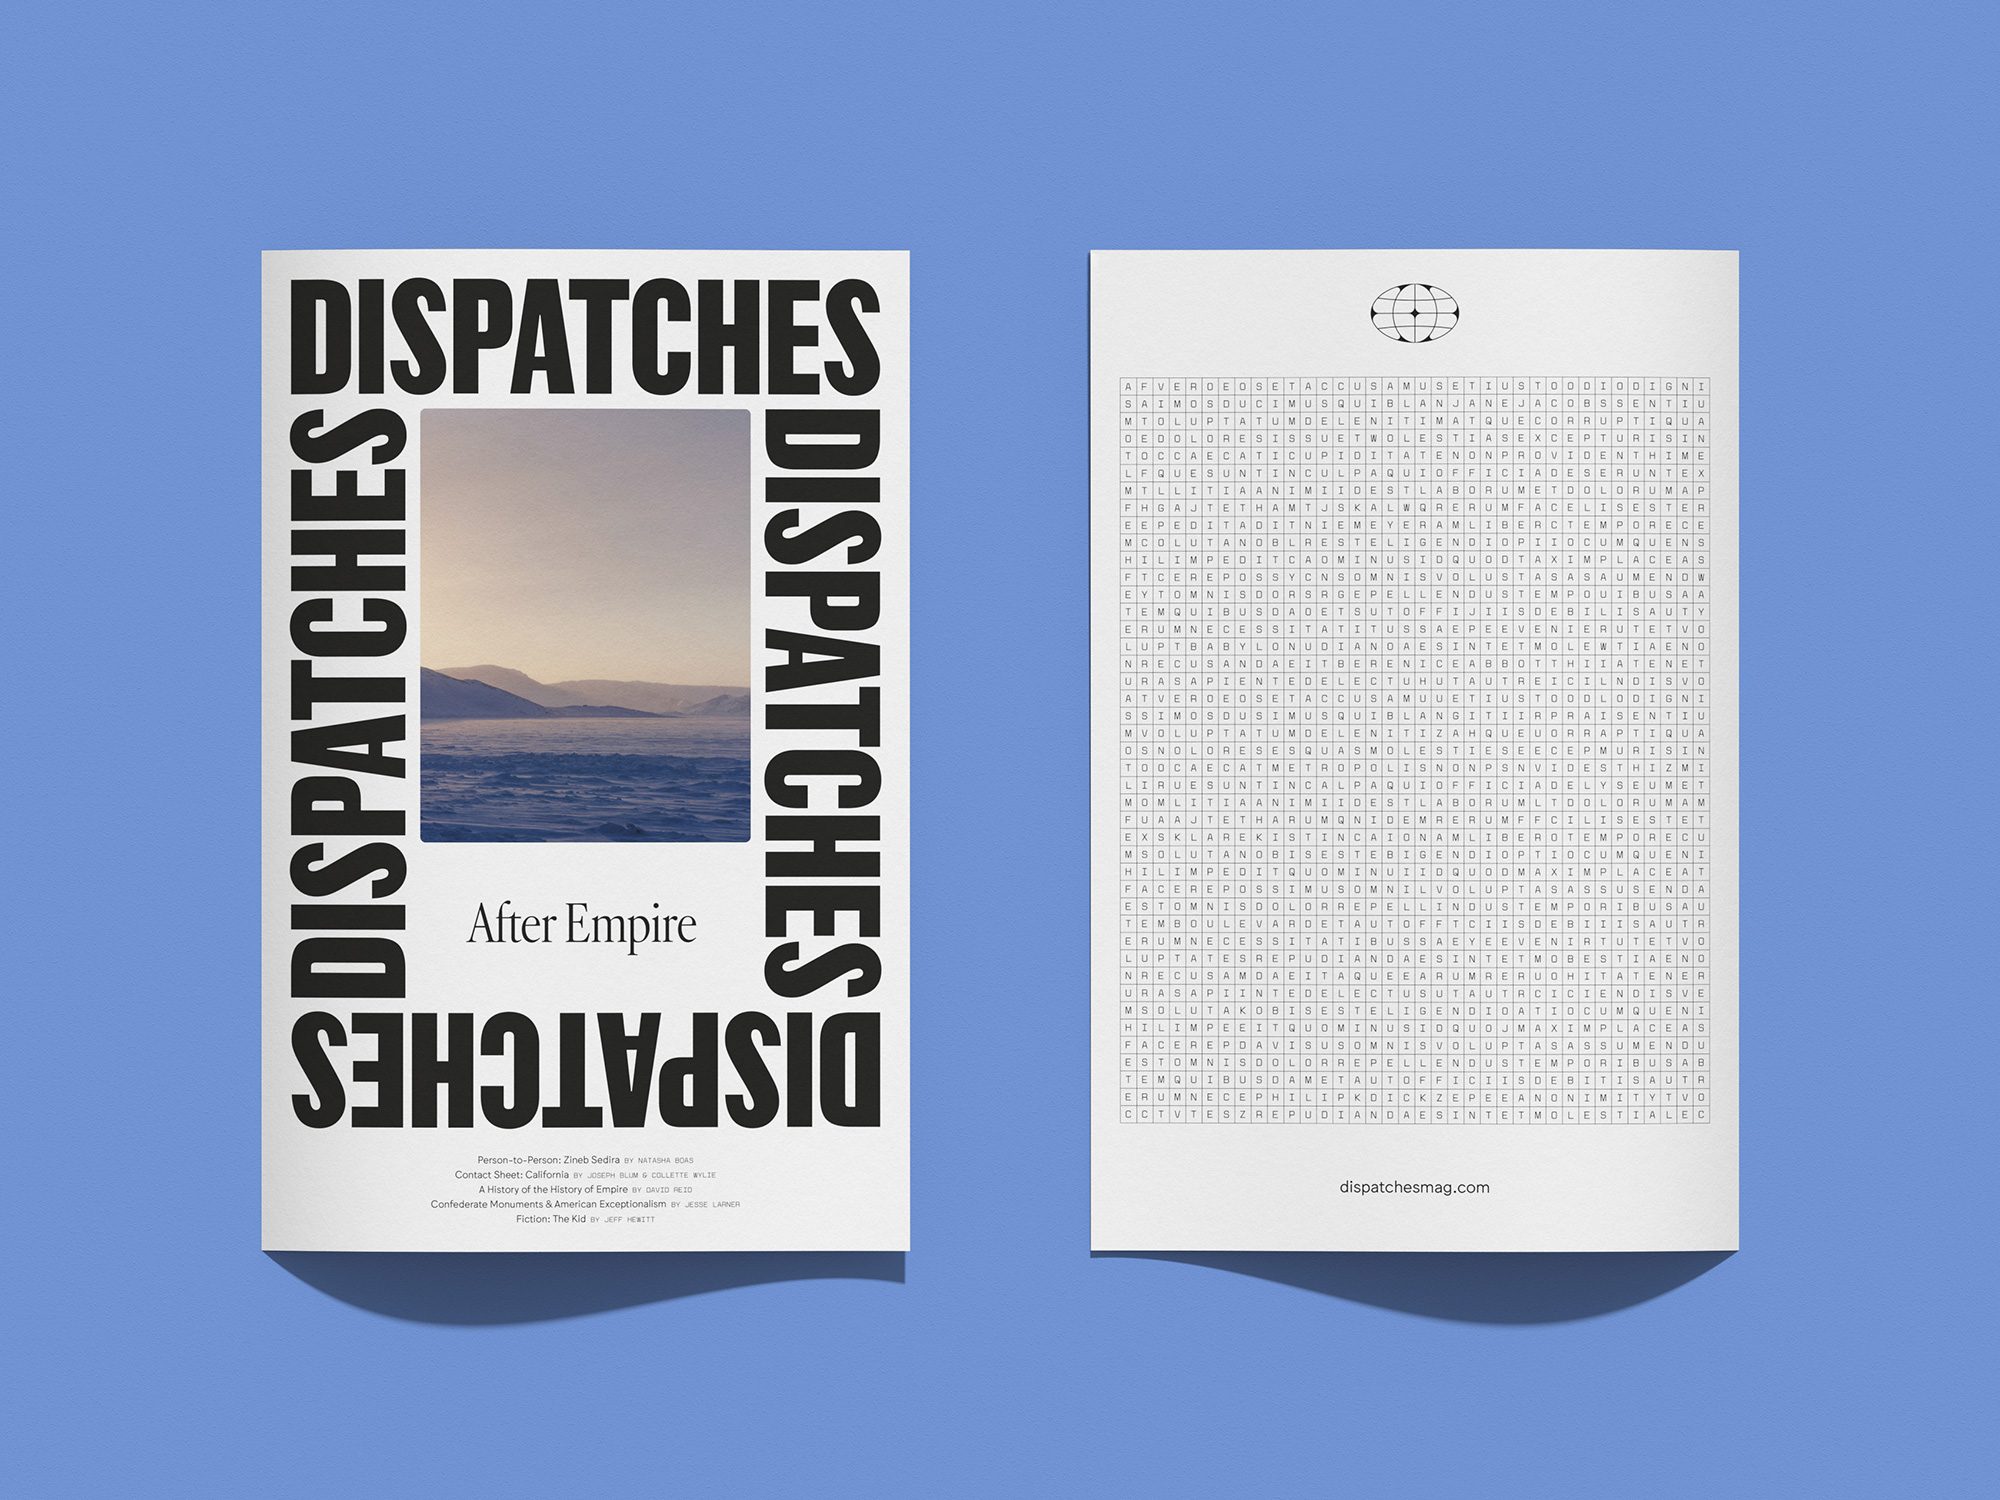 Gabe Ferreira: Dispatches Magazine — Cover and back cover. Photo by Alexi Hobbs.